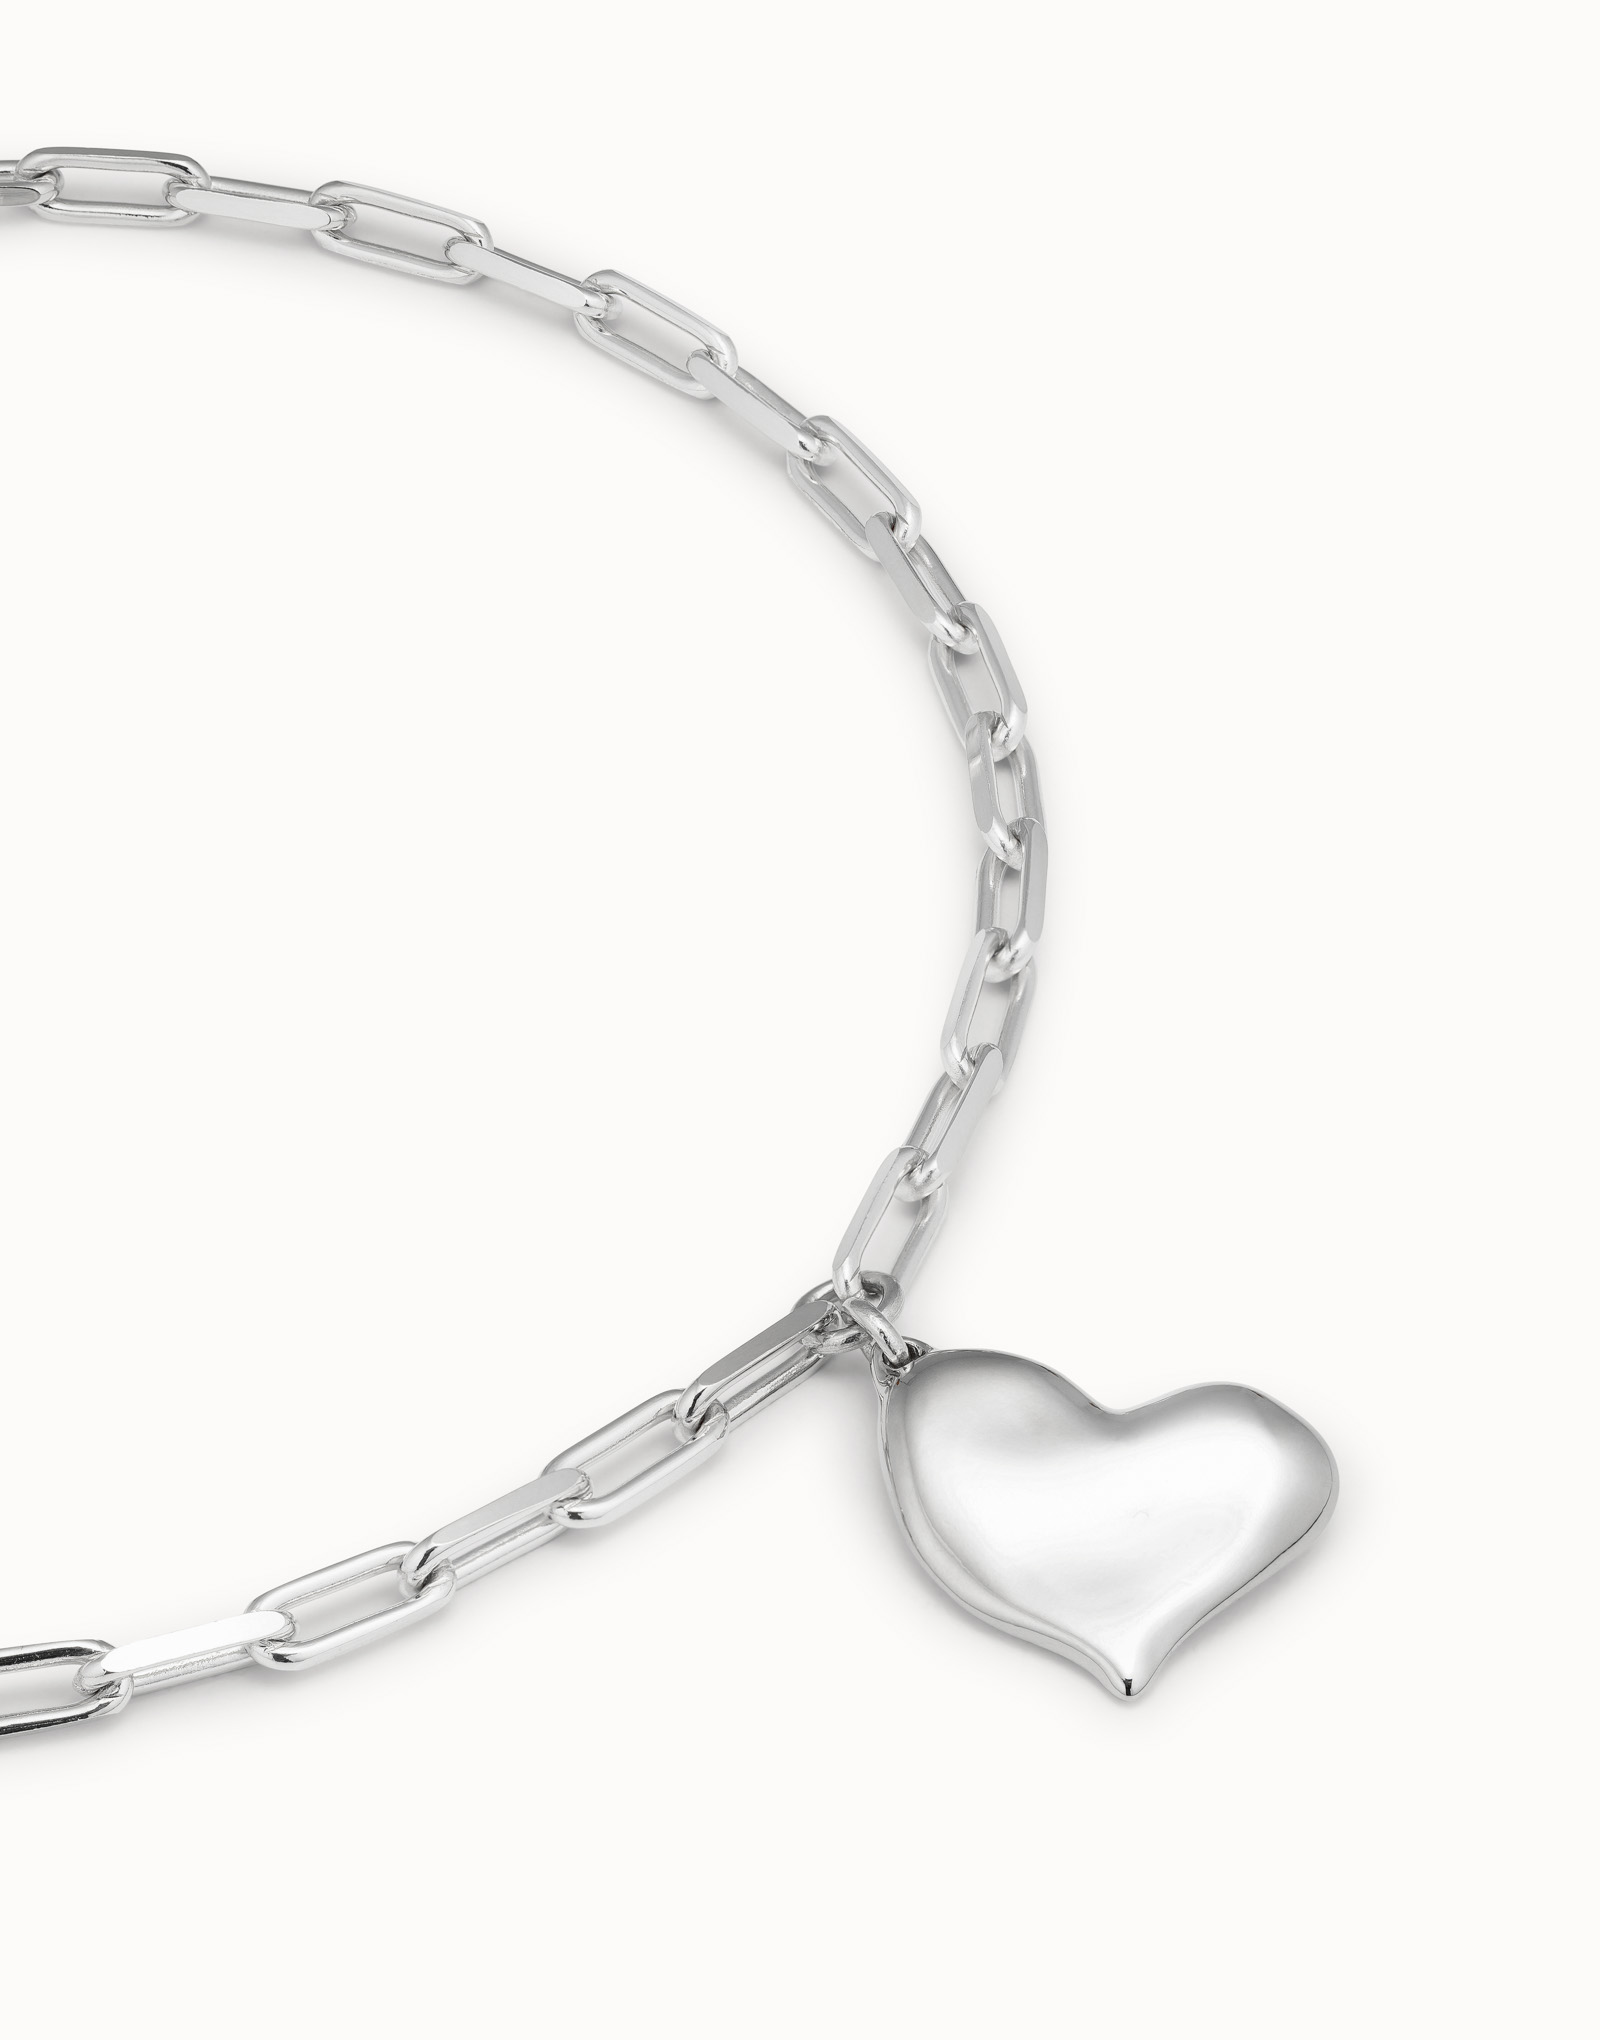 Collana corta placcata argento Sterling, catenina a maglie medie e cuore medio, Argent, large image number null